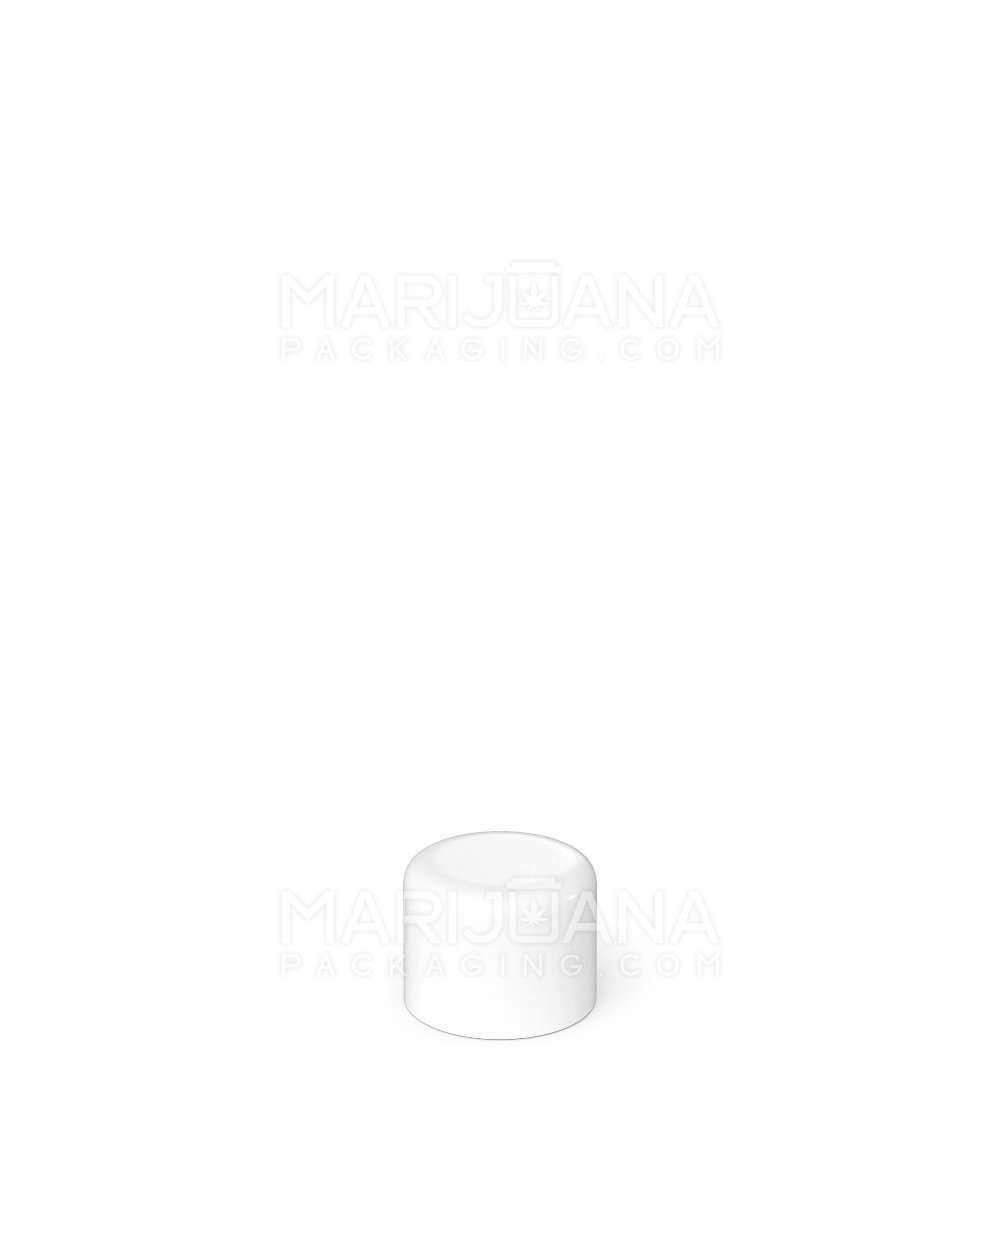 Child Resistant | Smooth Push Down & Turn Dome Caps w/ Foam Liner | 18mm - White Matte - 400 Count - 3